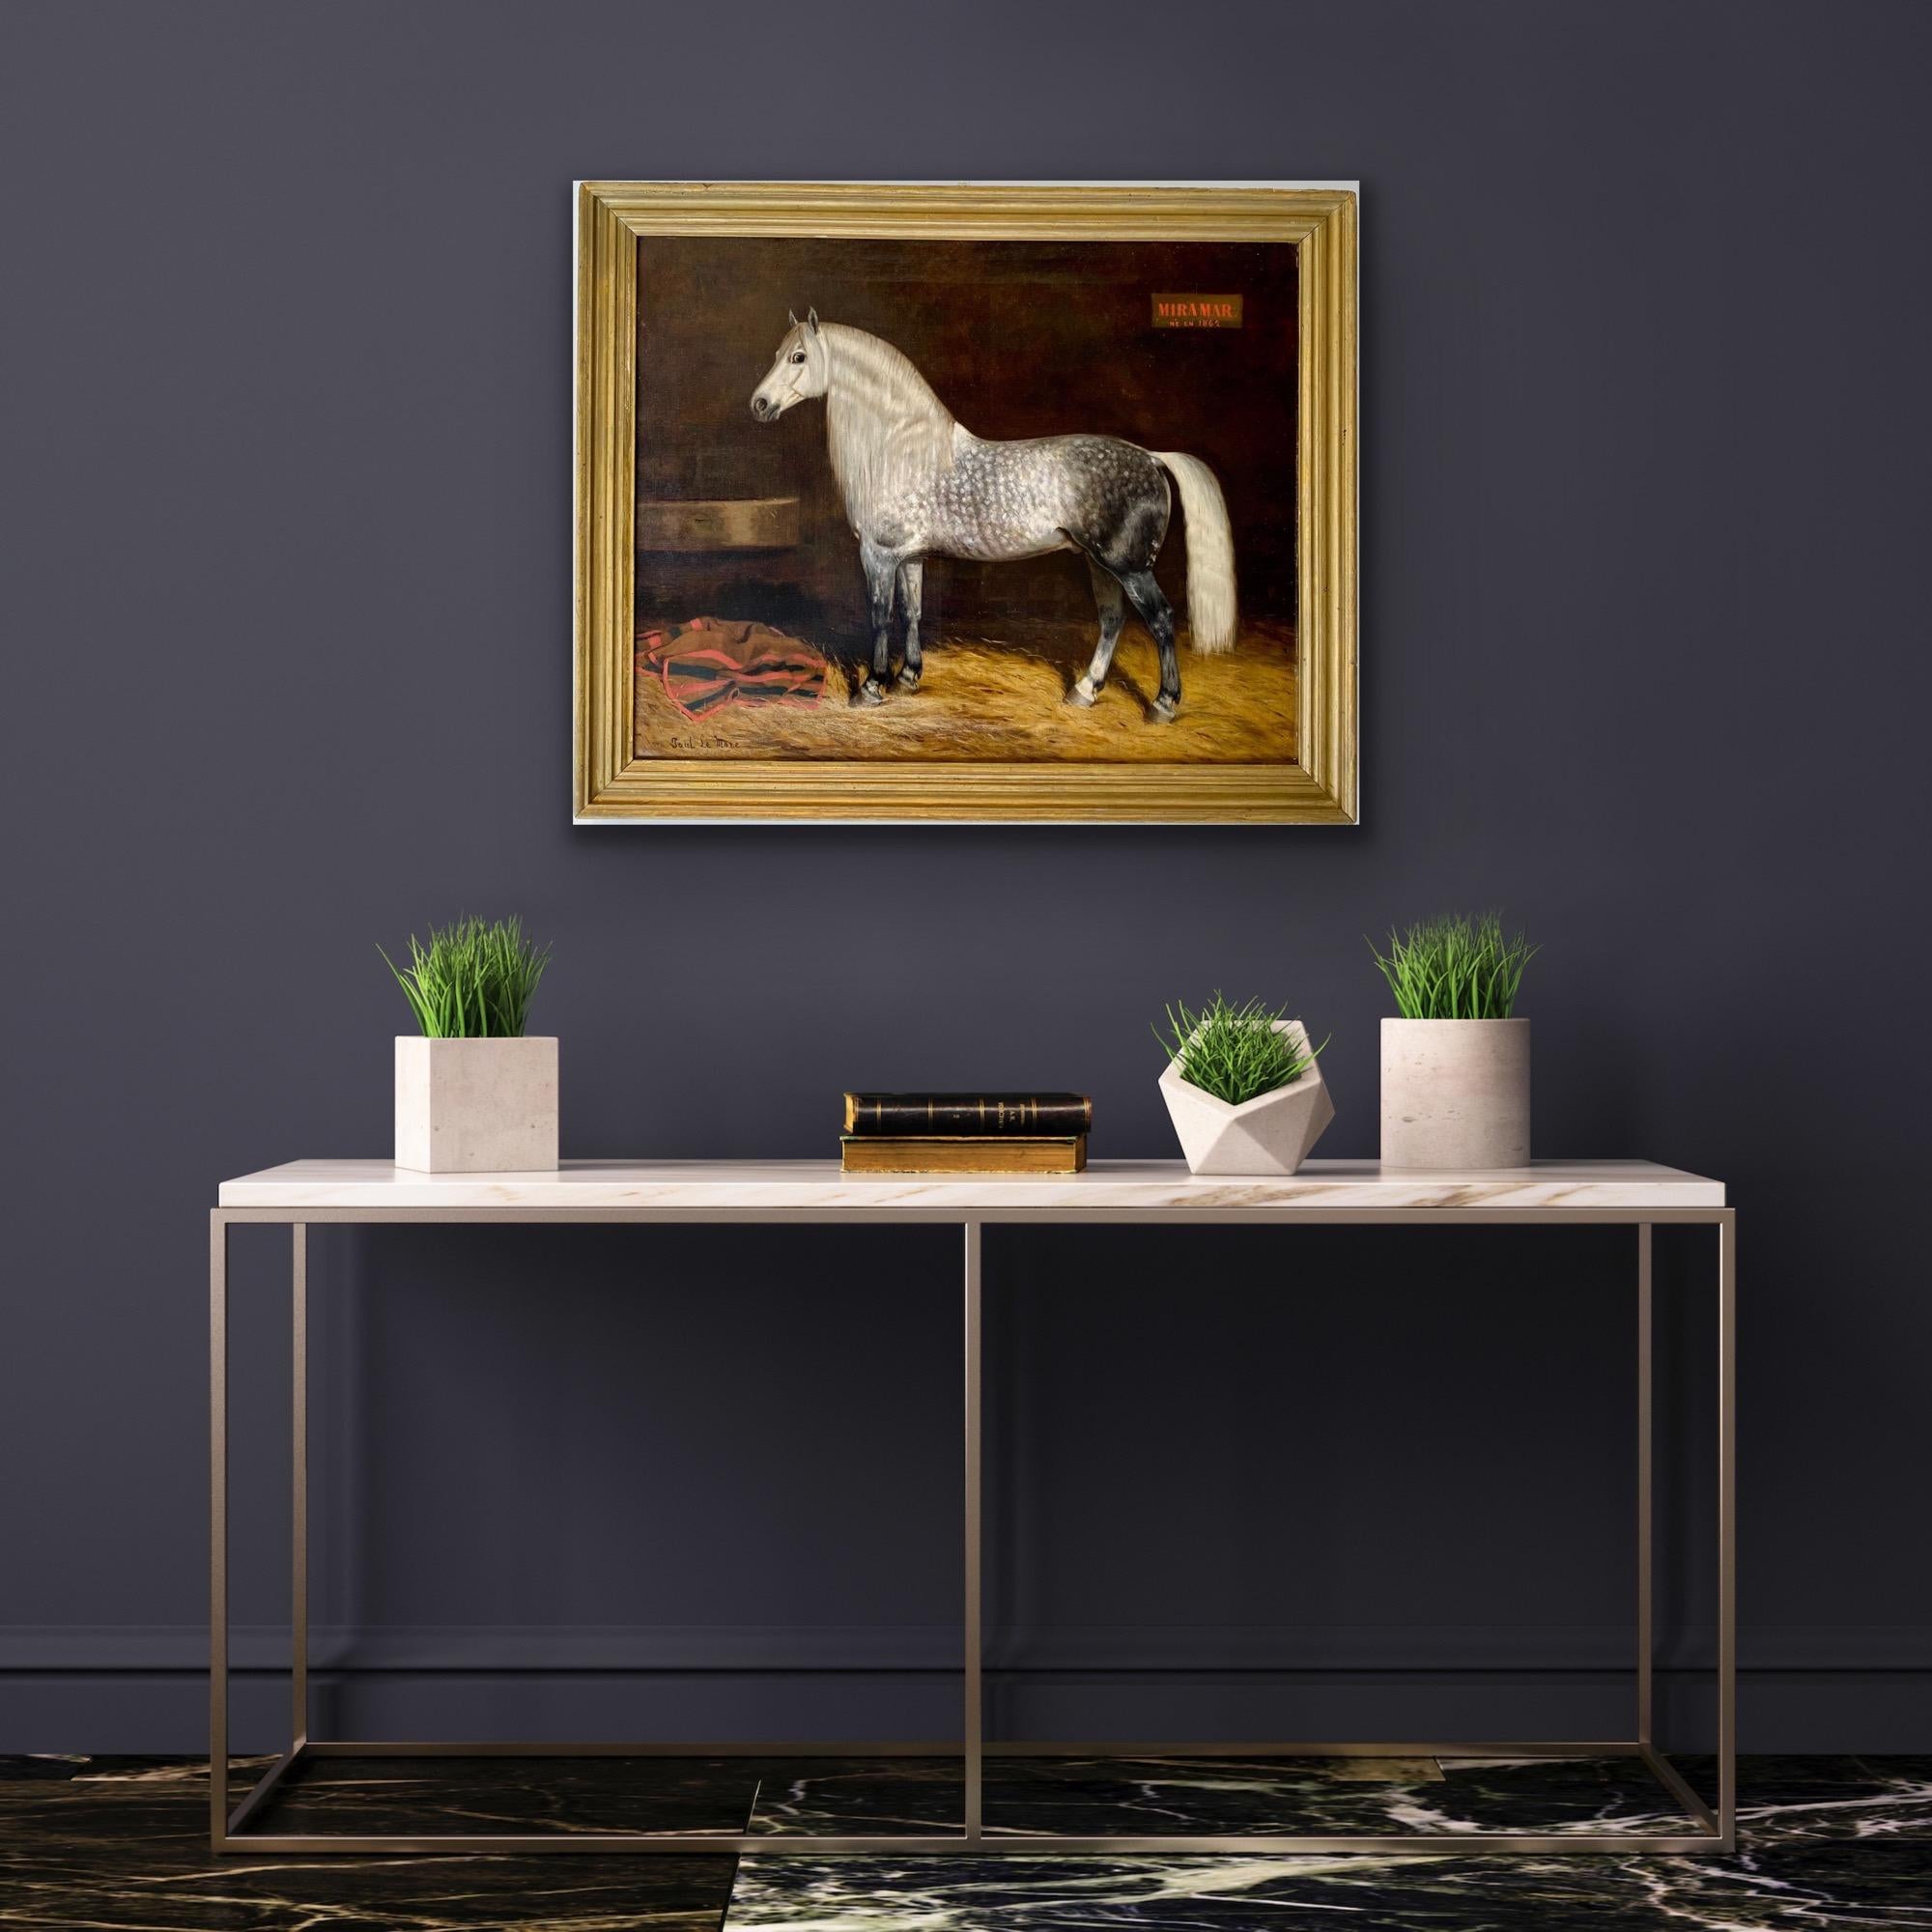 Large 19th century French Portrait of a Lippizan Horse - Antique Animal Genre - Painting by Paul Le More